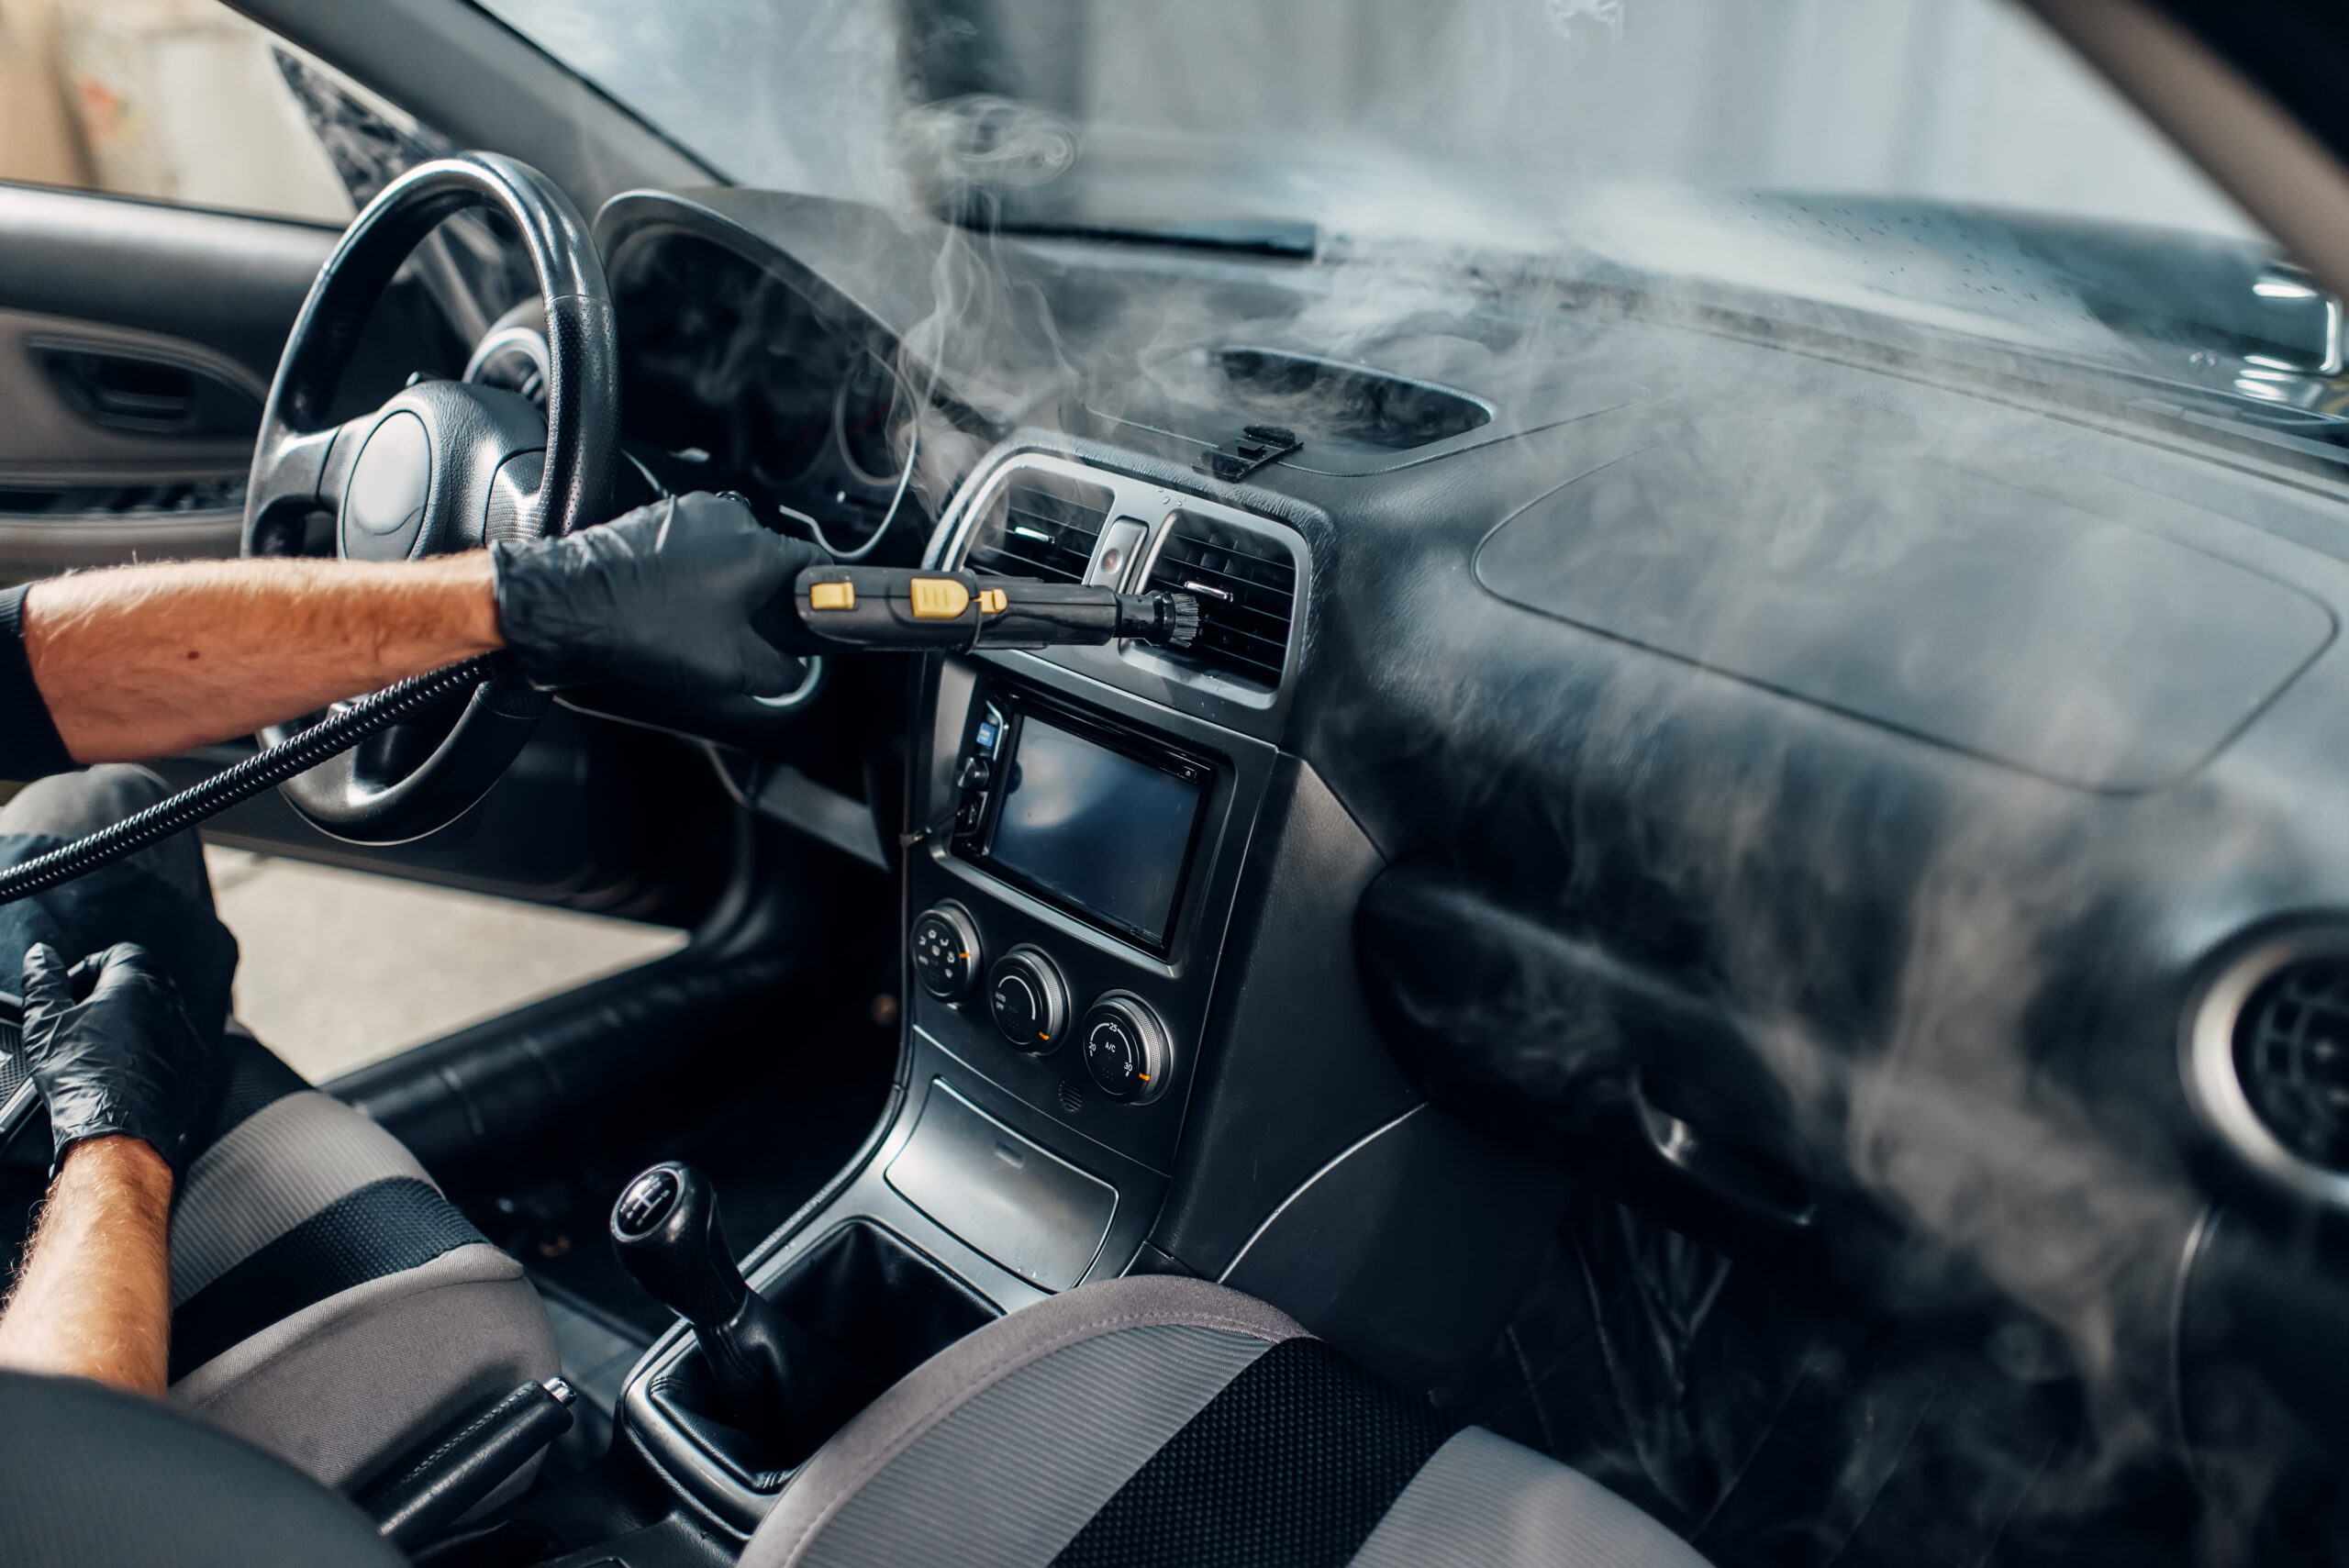 How are Vehicle Air Systems Disinfected? | Bactronix